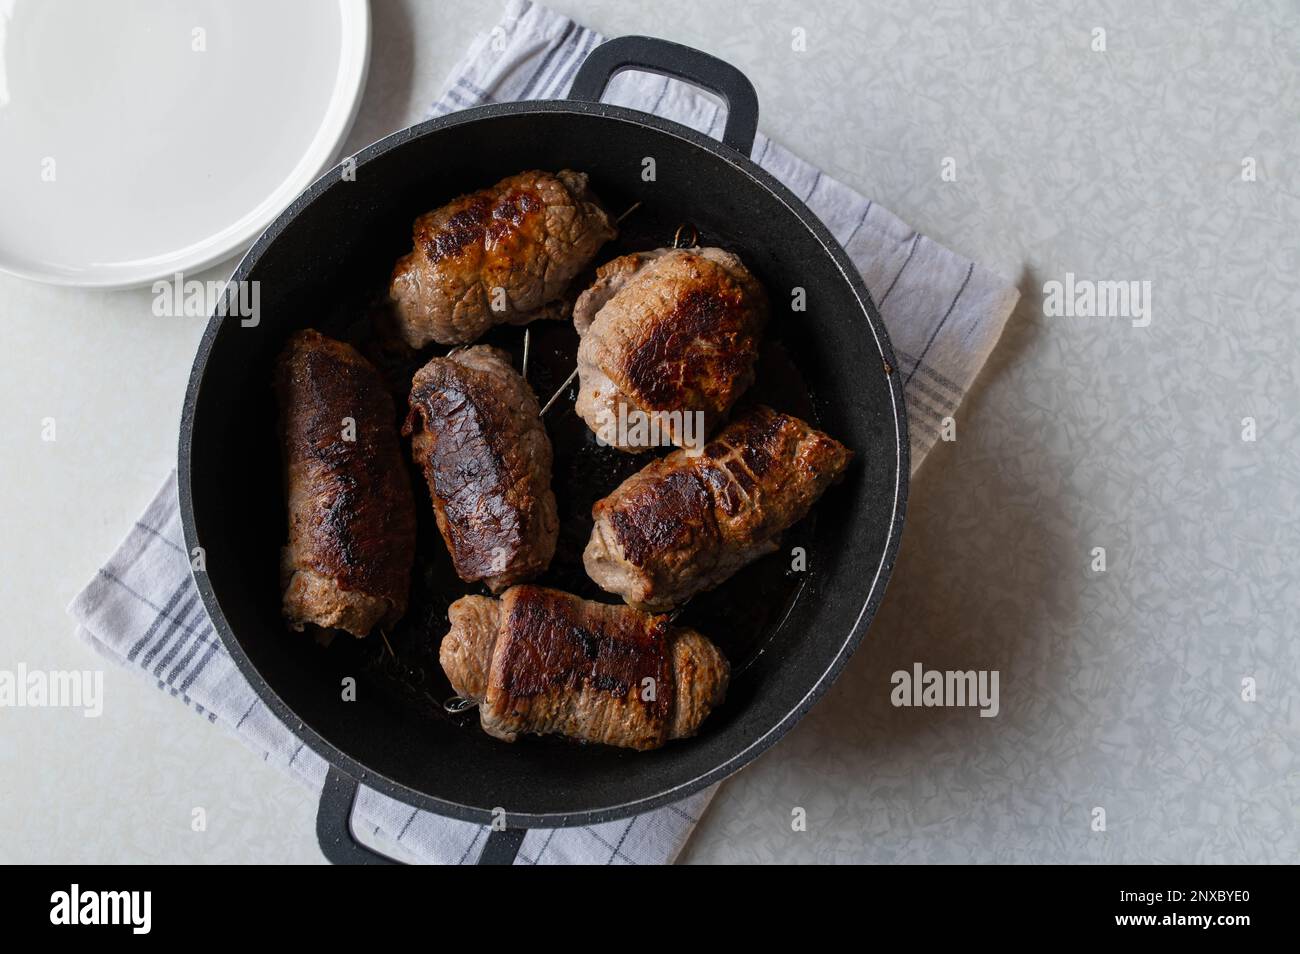 Beef roulades fried in a roasting pan. Cooking, making, preparation. Part of a series Stock Photo